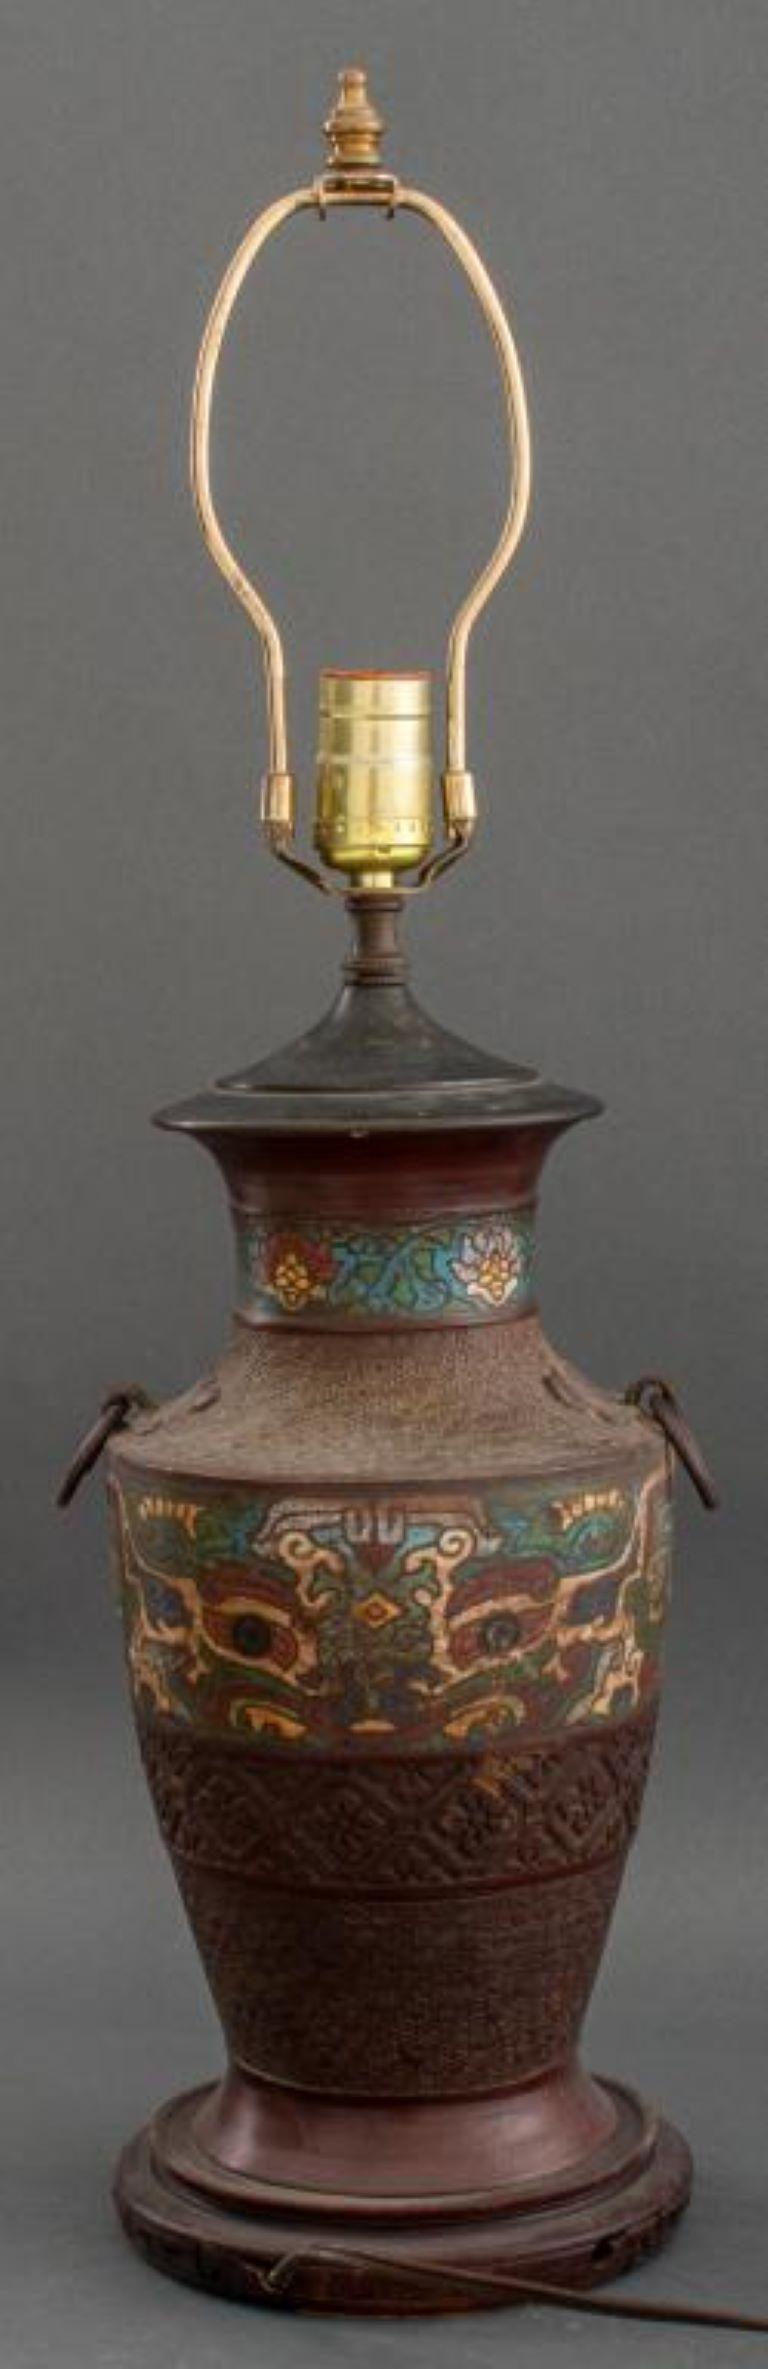 Archaic Chinese Style Champleve Enamel Vase Lamp For Sale 4